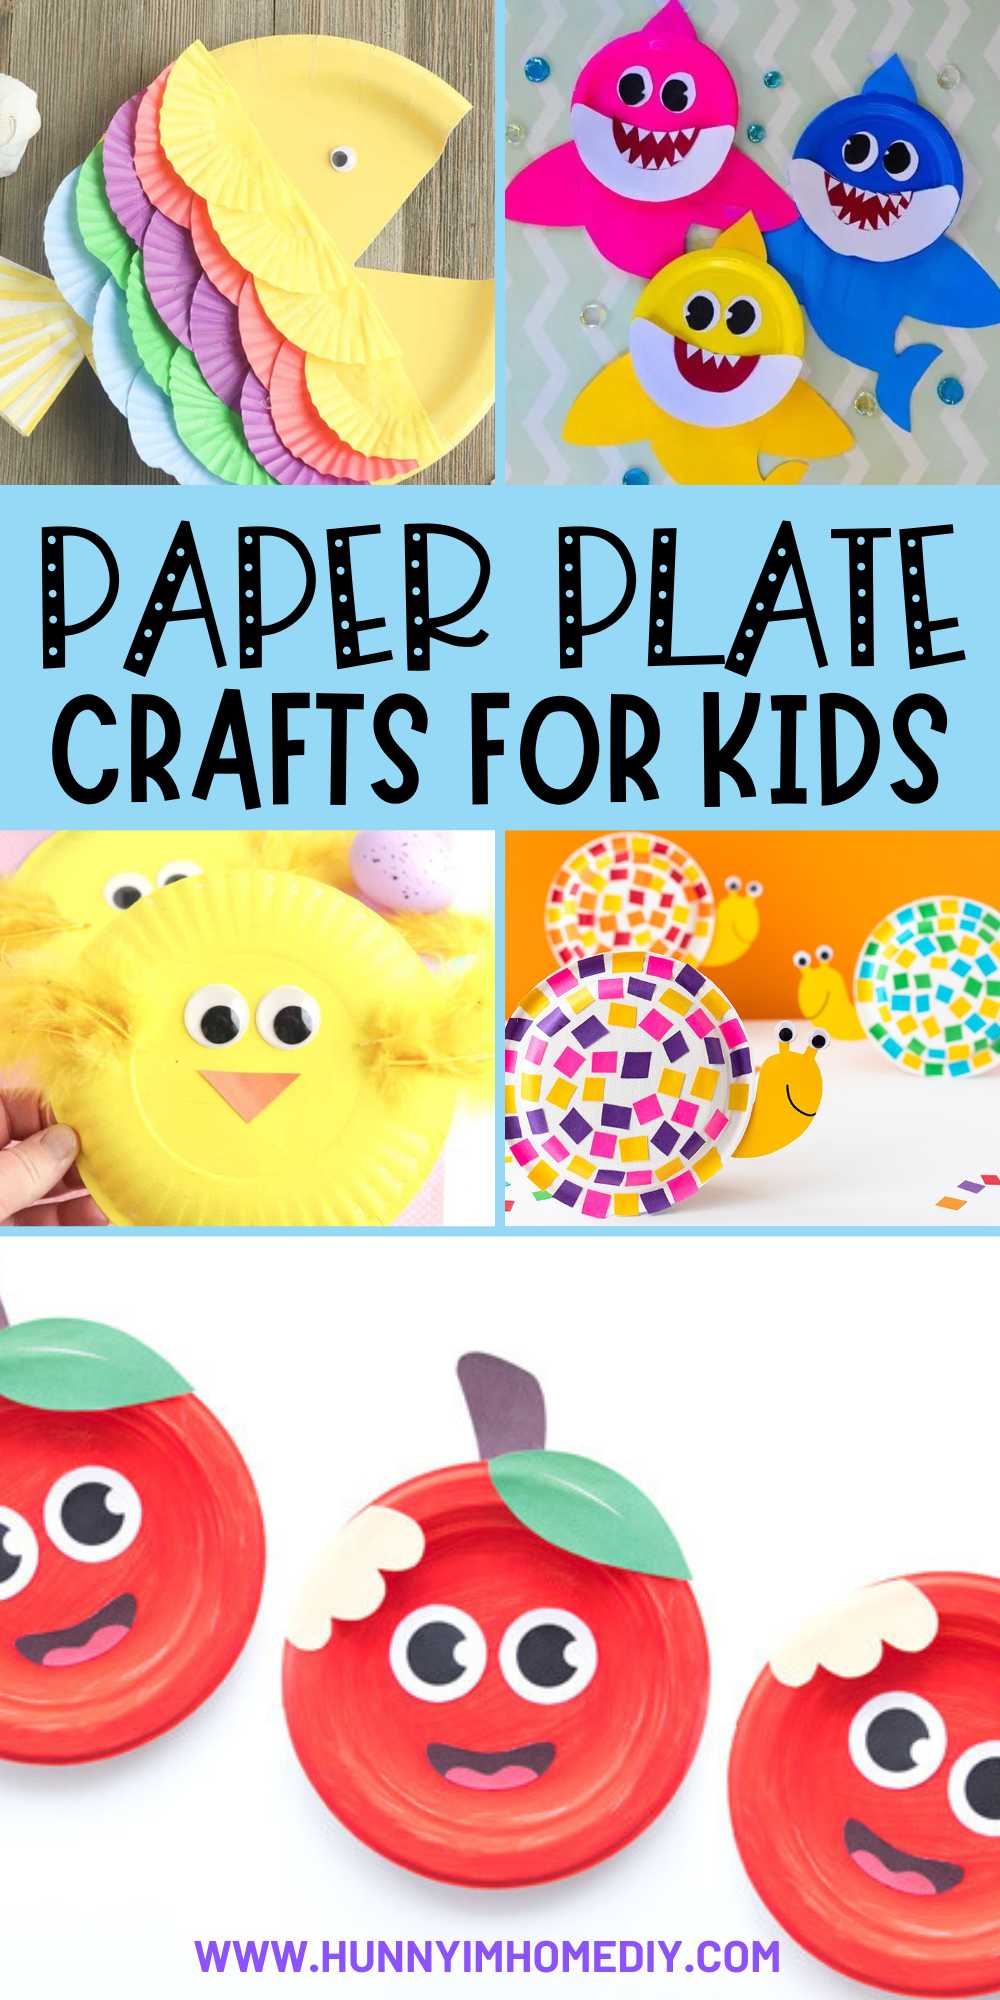 https://www.hunnyimhomediy.com/wp-content/uploads/2023/03/paper-plate-crafts-for-kids.jpg